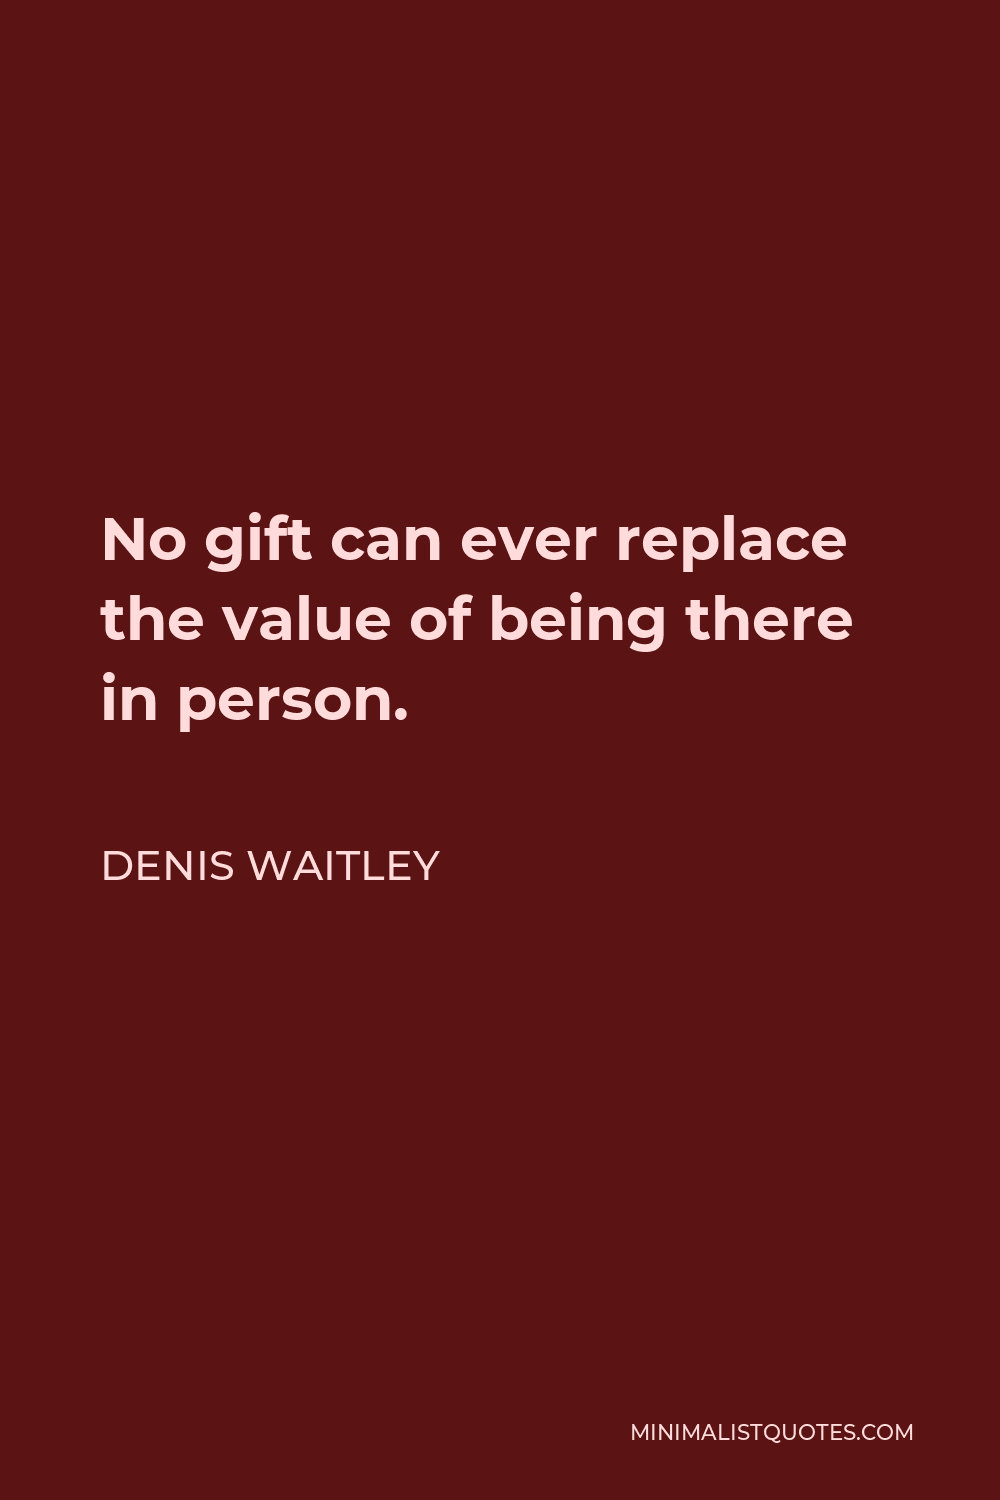 Denis Waitley Quote - No gift can ever replace the value of being there in person.